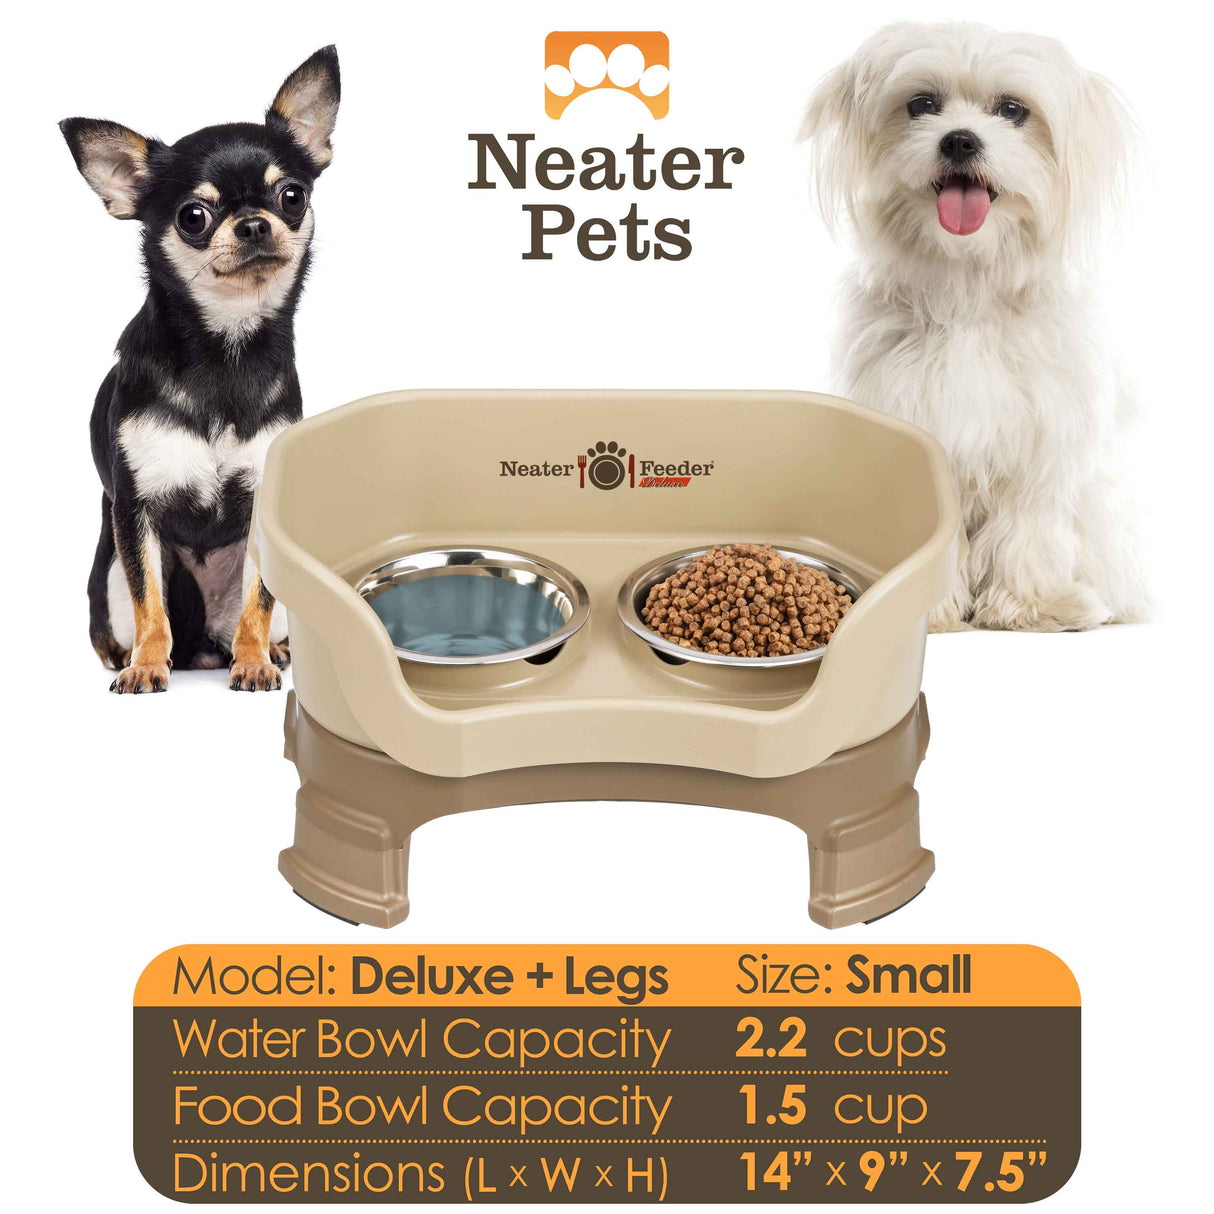 Cappuccino Small Dog with leg extensions bowl capacity